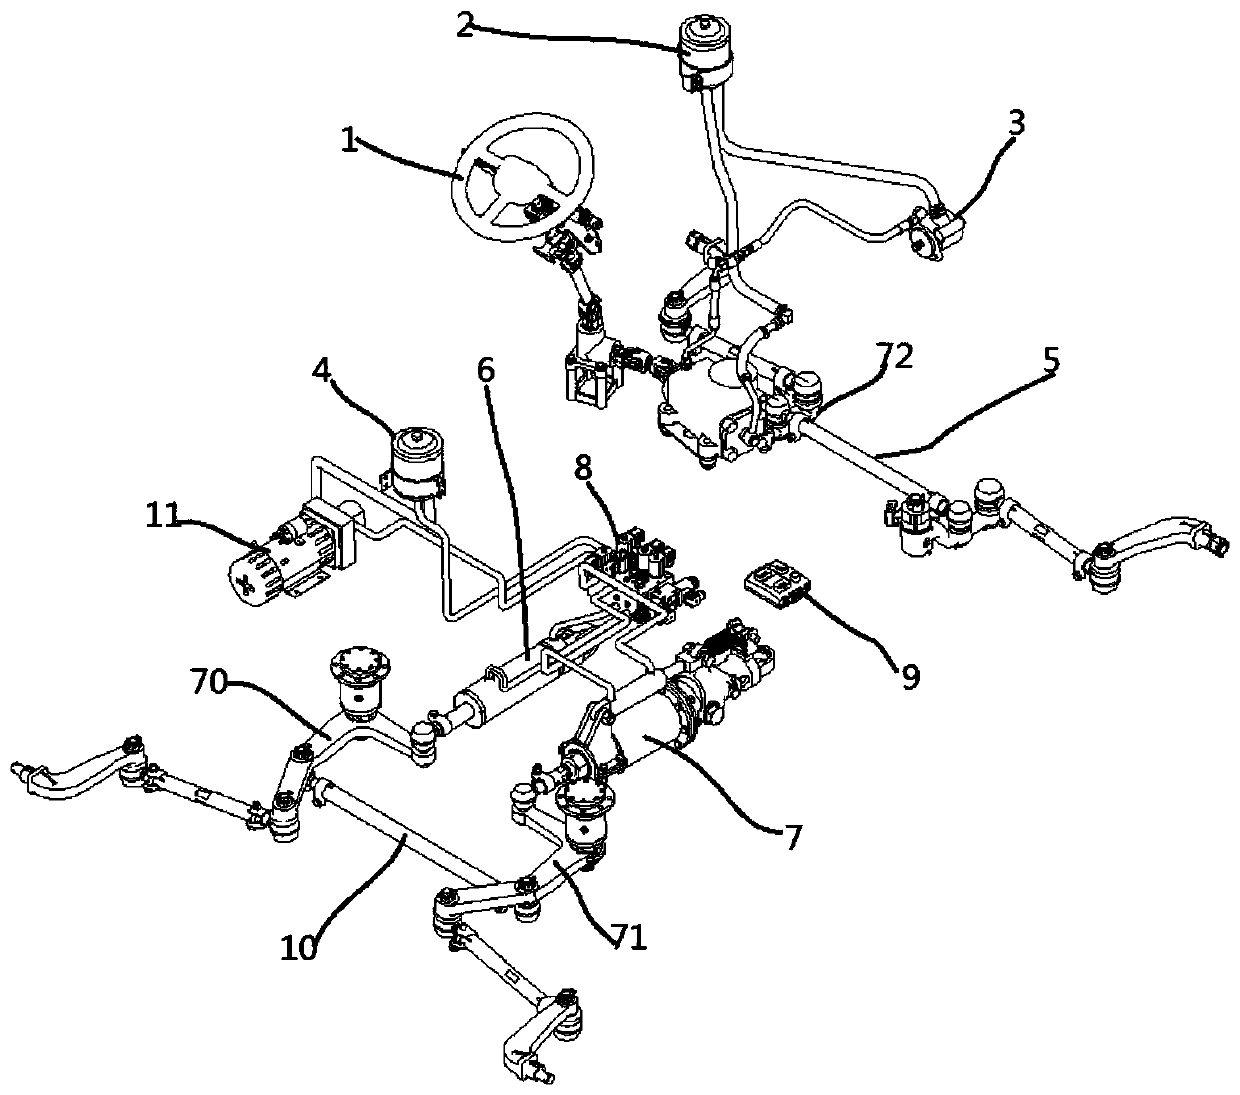 A steering return locking mechanism assembly and its steering system